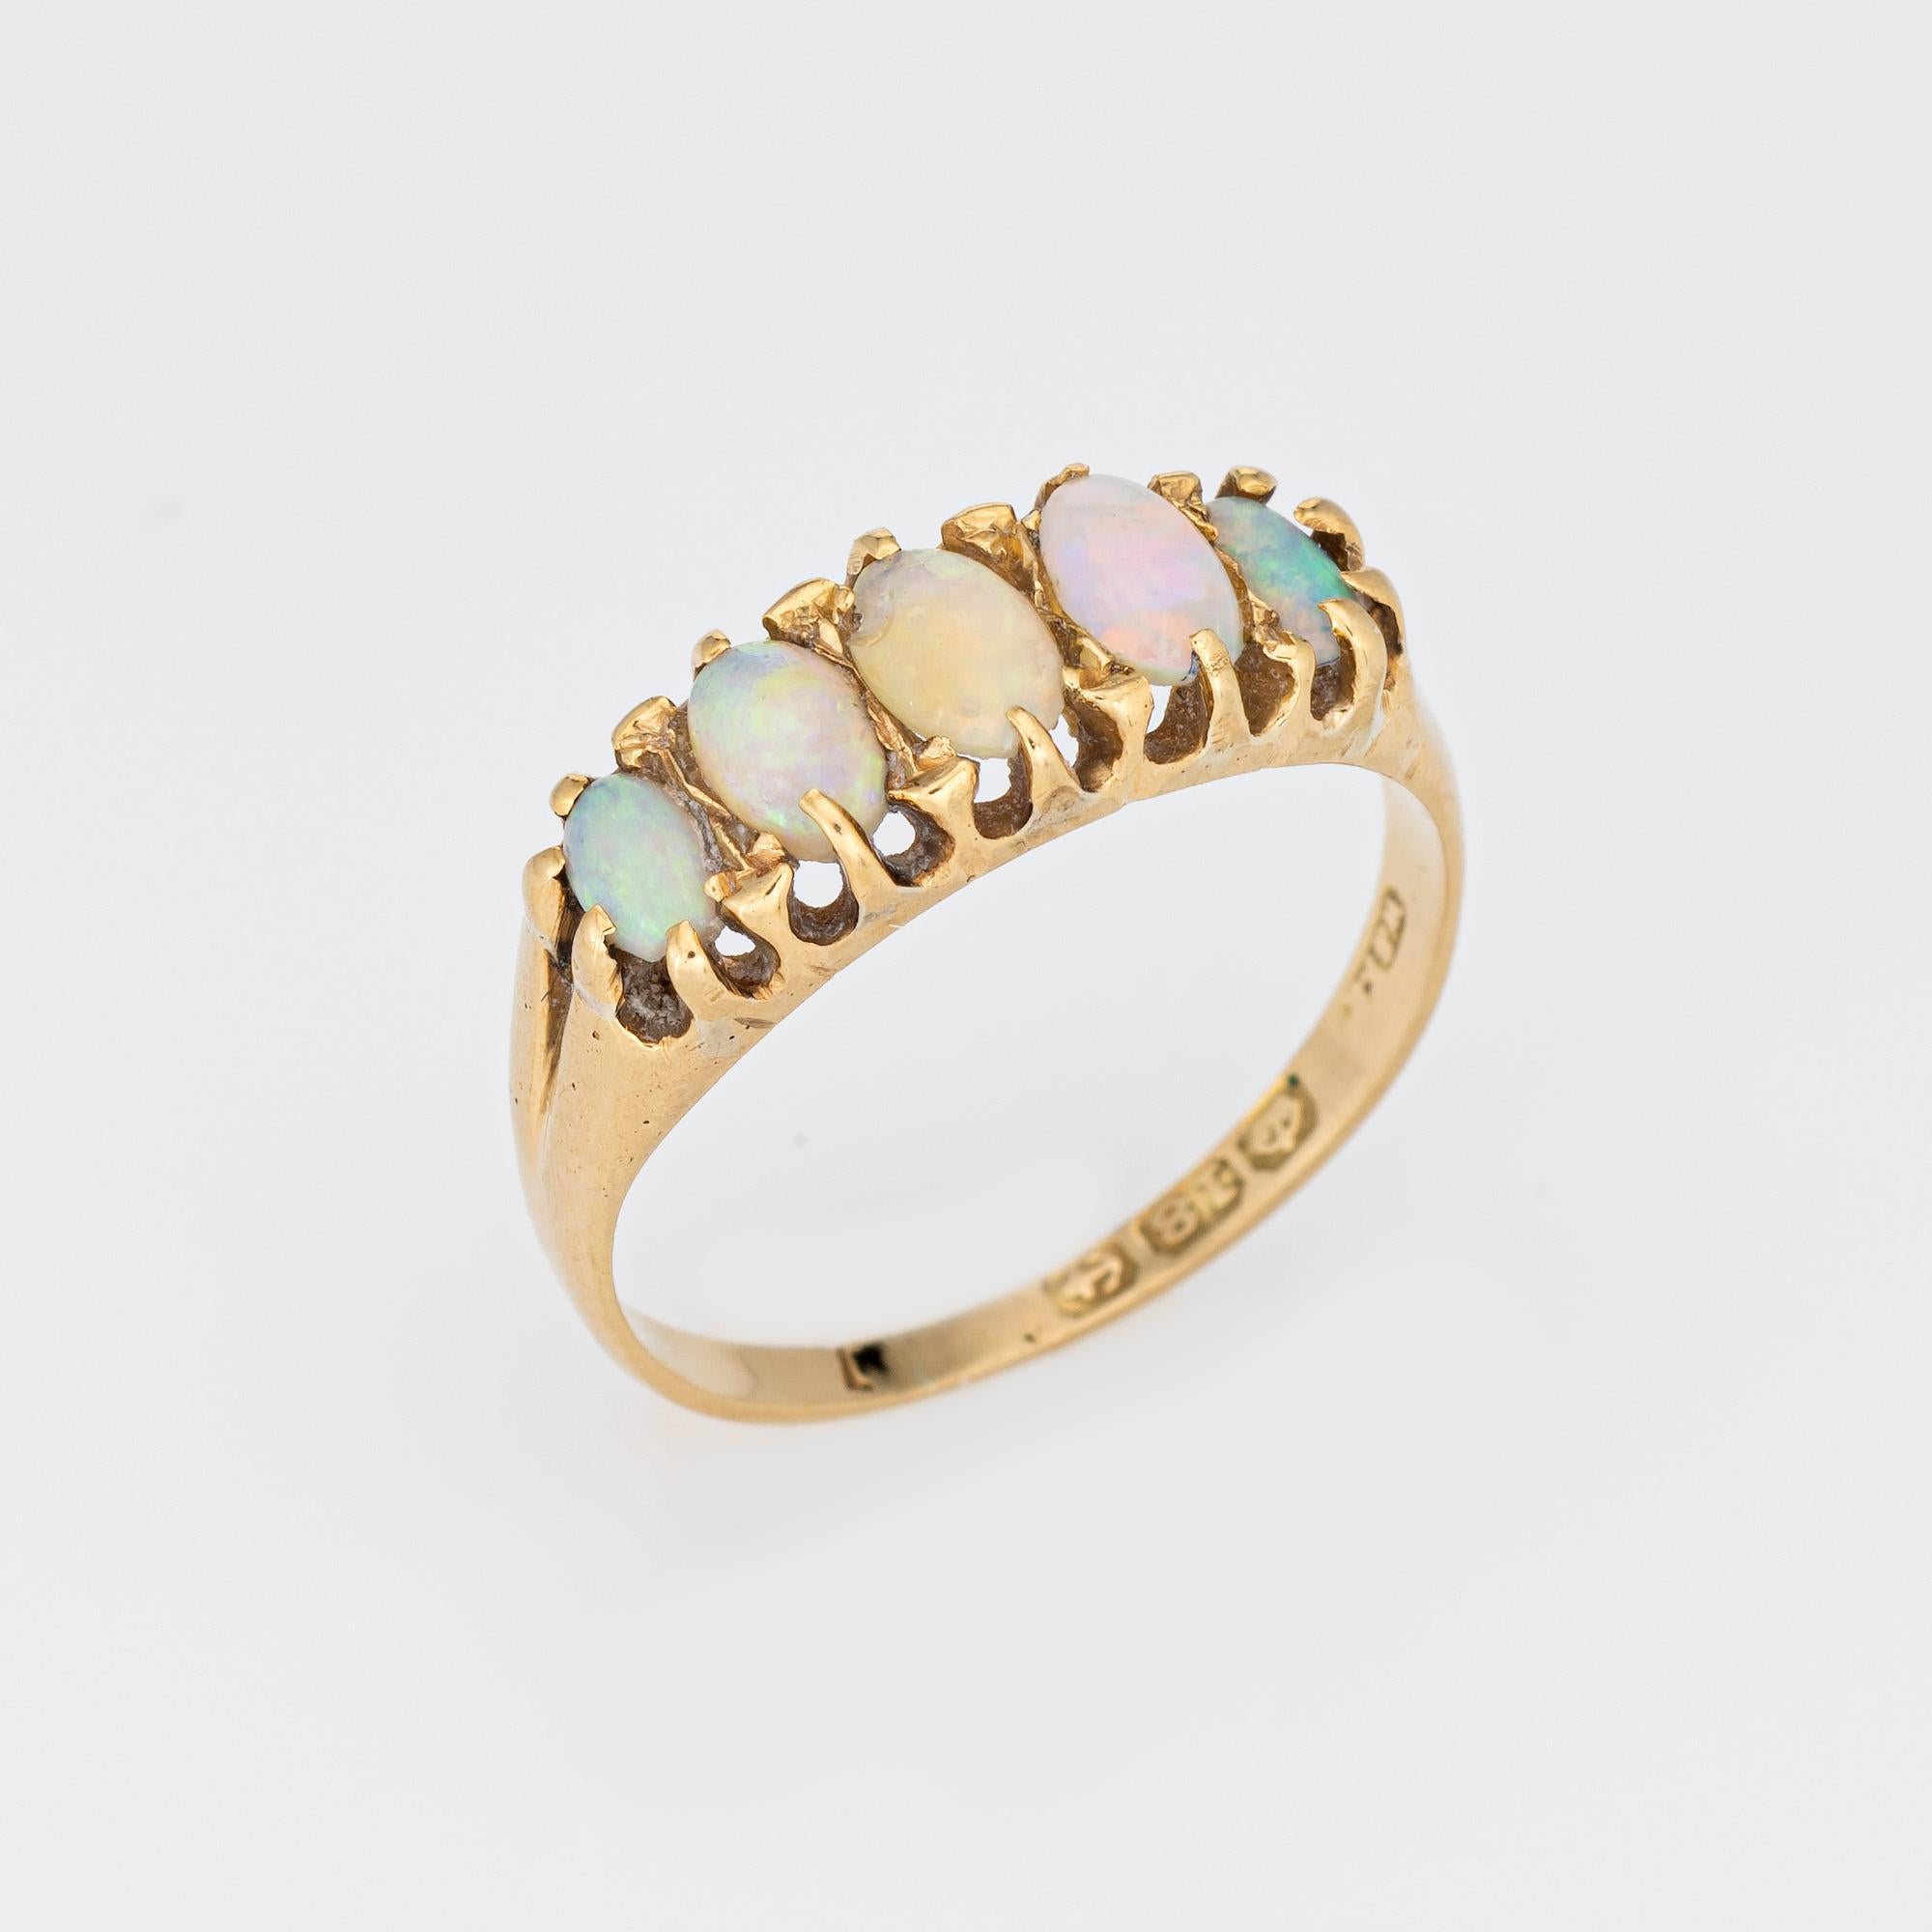 Antique Edwardian 5 stone opal ring (circa 1910s), crafted in 18 karat yellow gold. 

Five natural opals measure from 4mm x 3mm to 3mm x 2.5mm. The opals are in good condition with some wear evident (chip to one opal). 

The opals are set in a